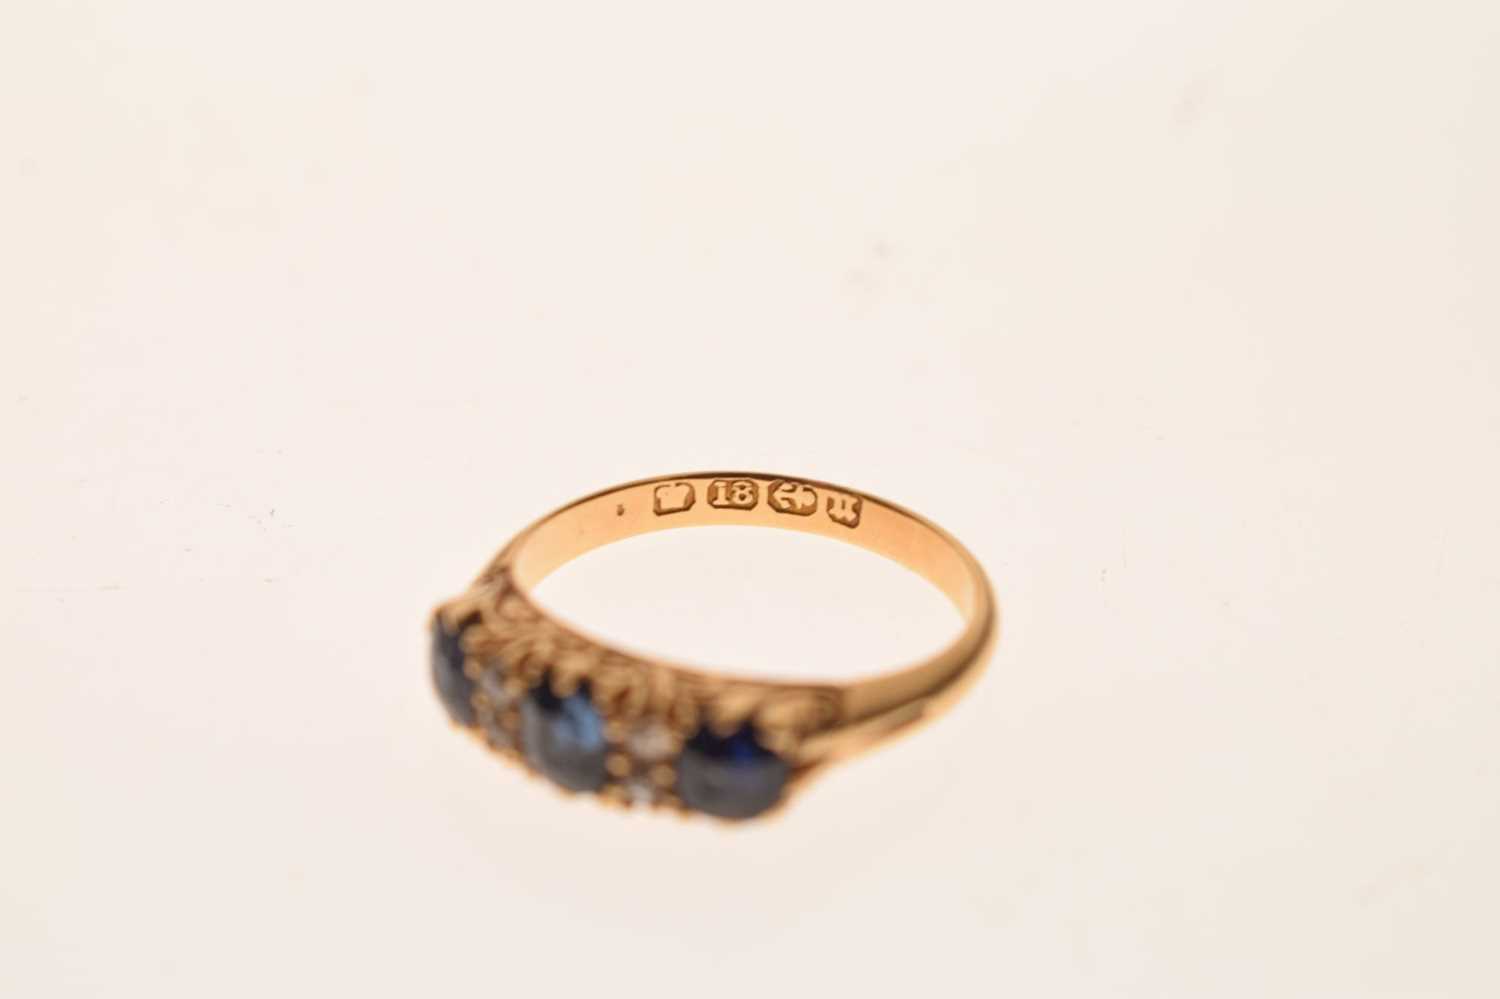 Late Victorian 18ct gold, sapphire and diamond ring - Image 5 of 6